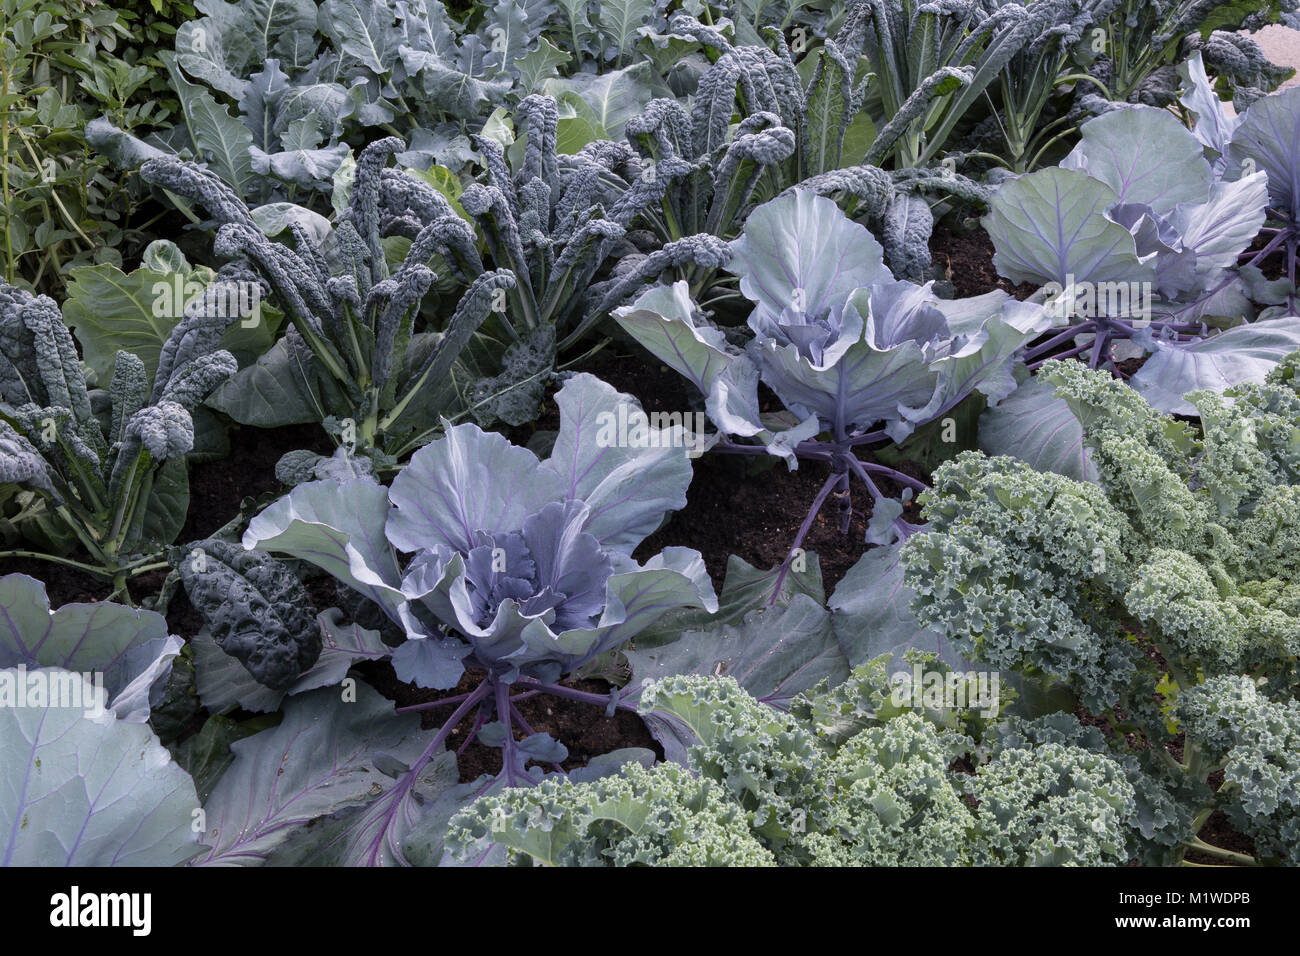 A kitchen garden vegetable patch growing in rows from right to left: Kale Reflex - Cabbage Red Jewel - Kale Nero di Toscano UK Stock Photo